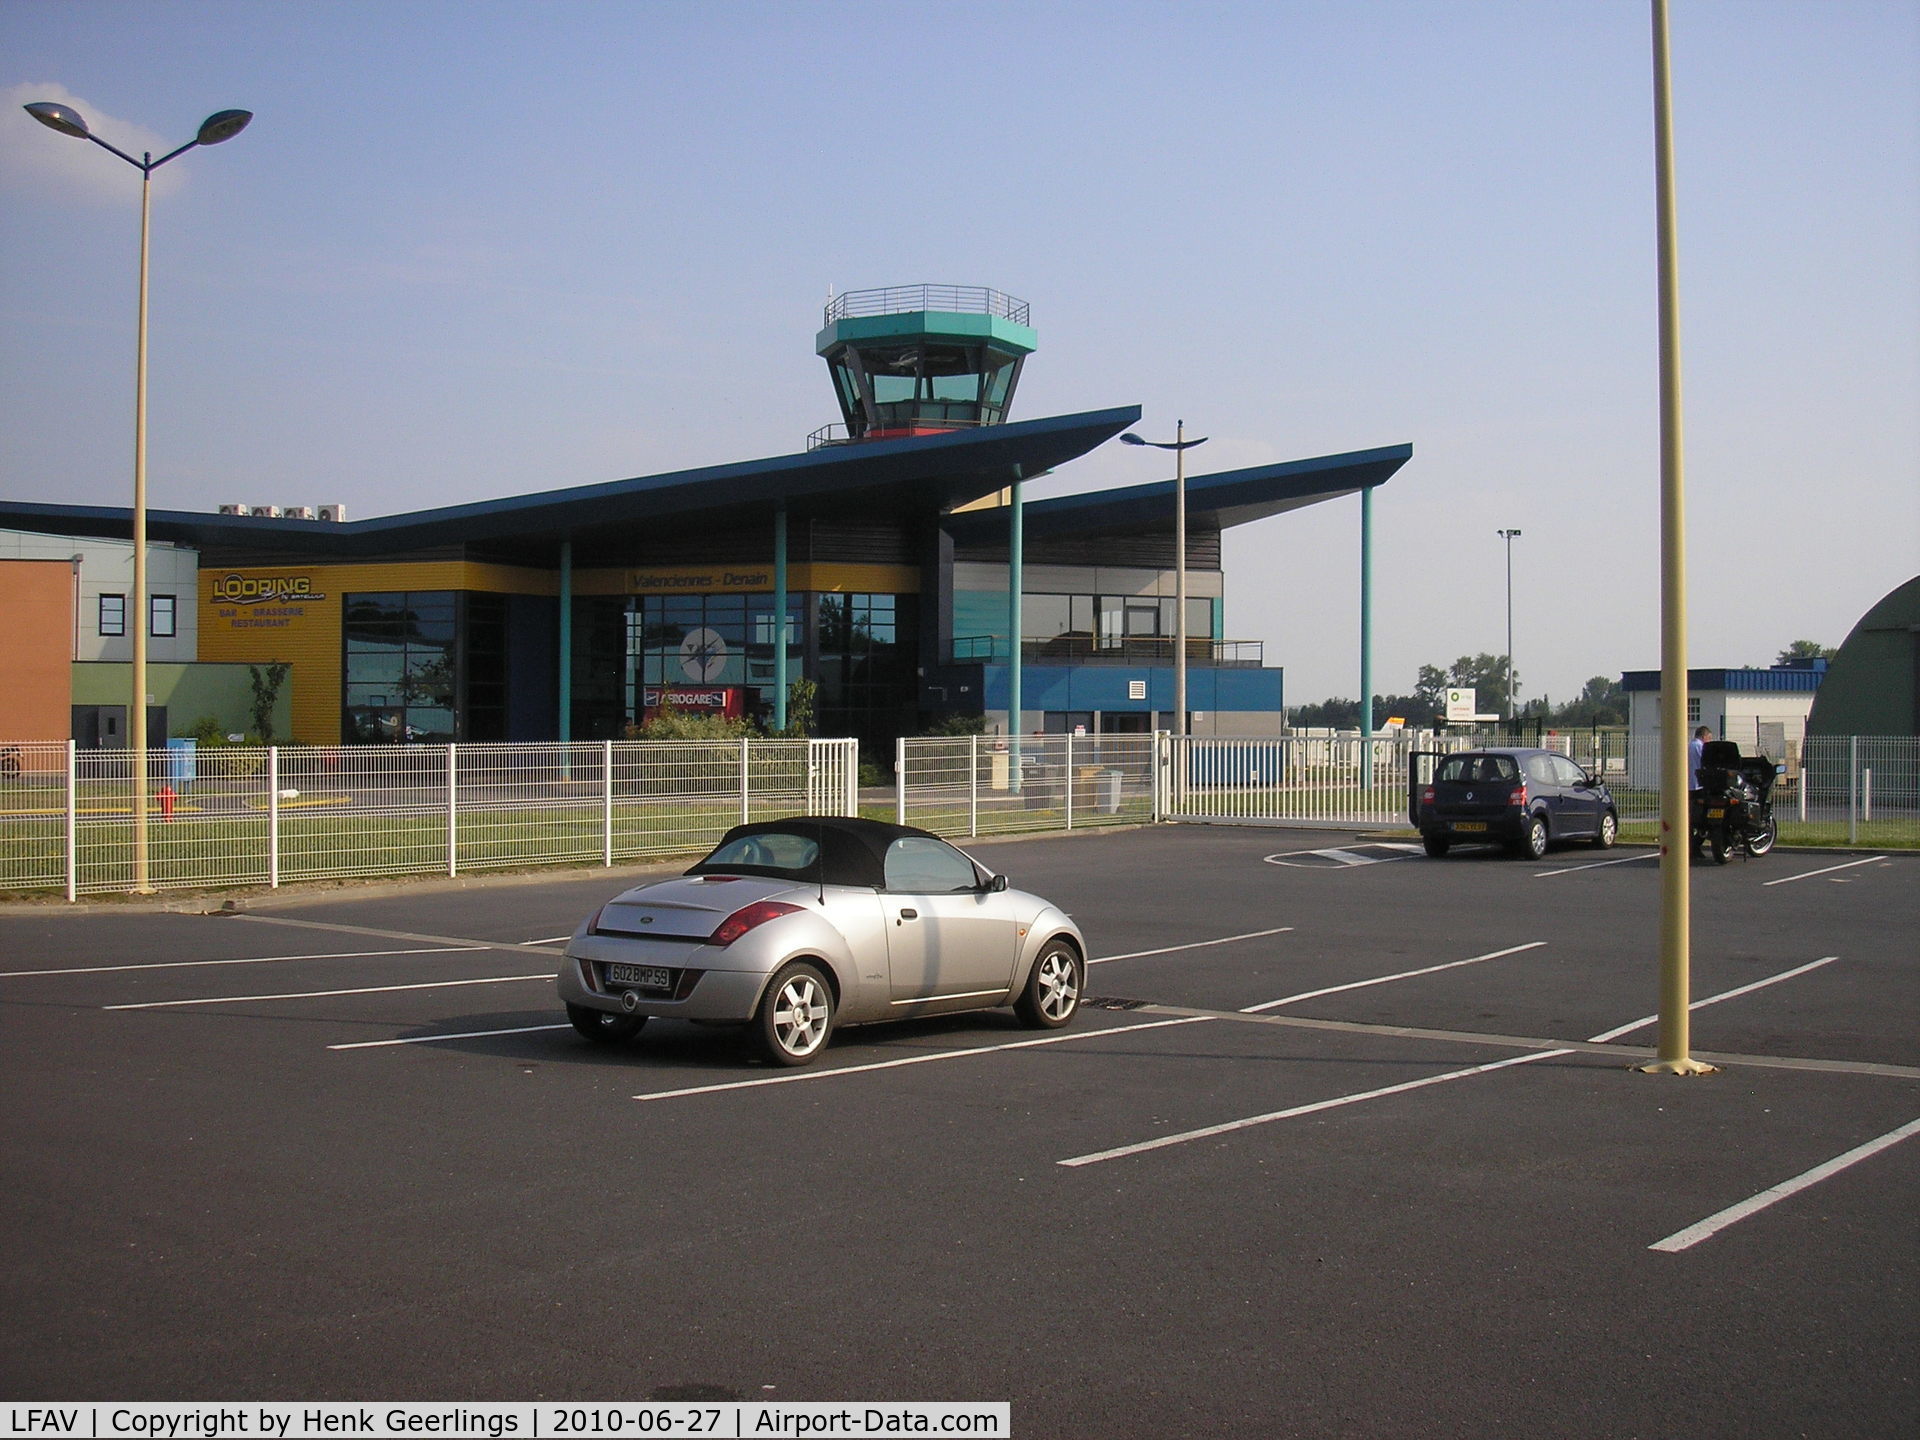 Valenciennes Airport, Denain Airport France (LFAV) - Small airport in the Northern part of France